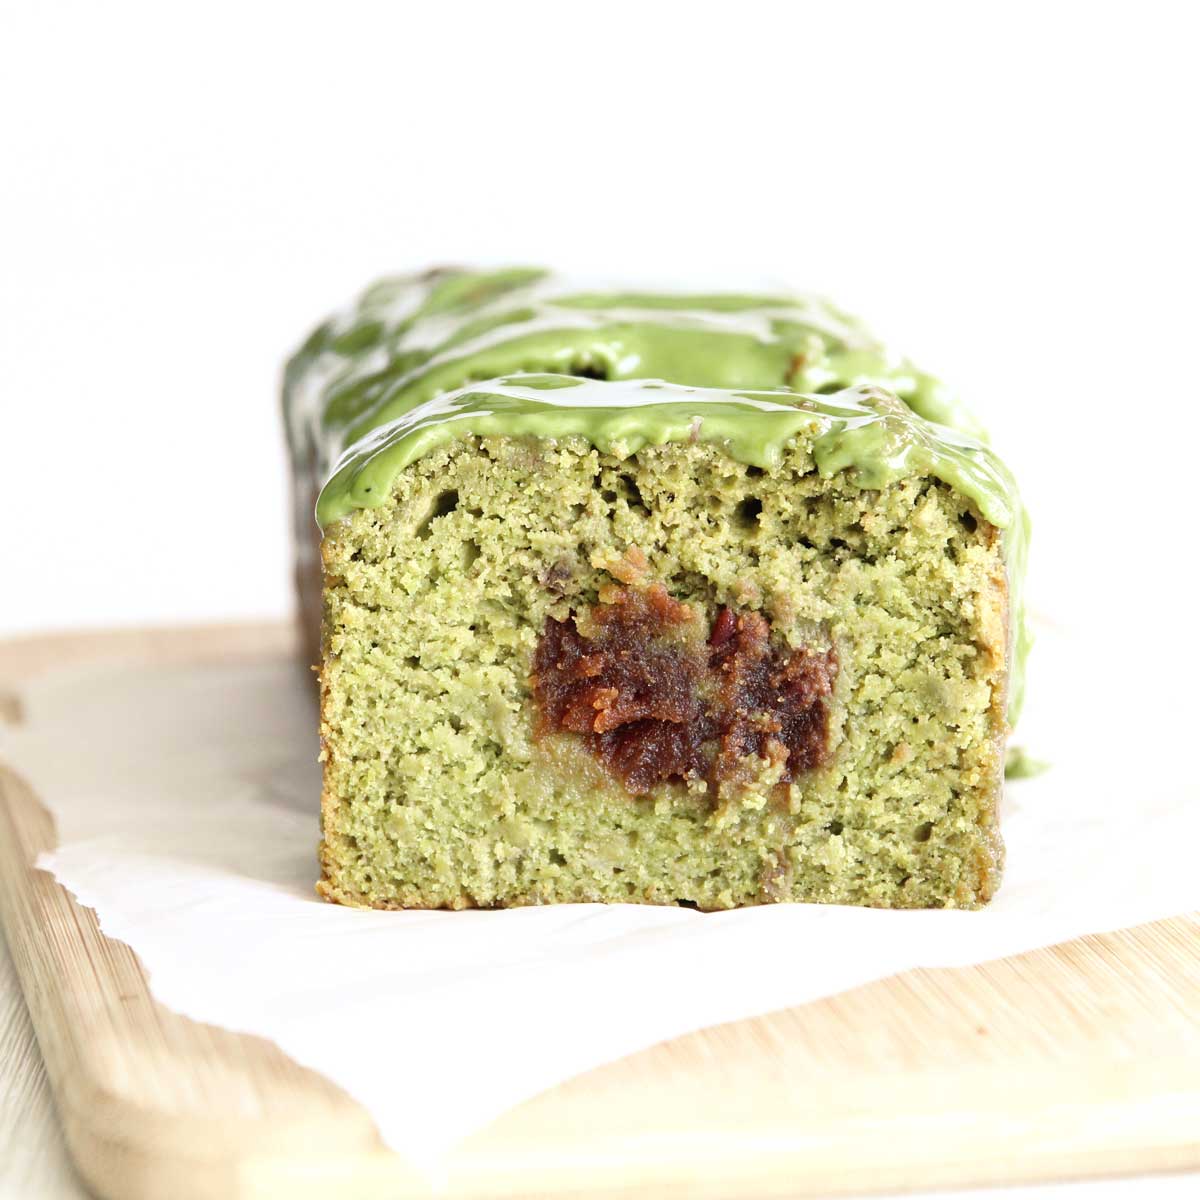 How to Make Matcha Banana Bread with Red Bean Paste Filling - Sweet Matcha Whipped Cream